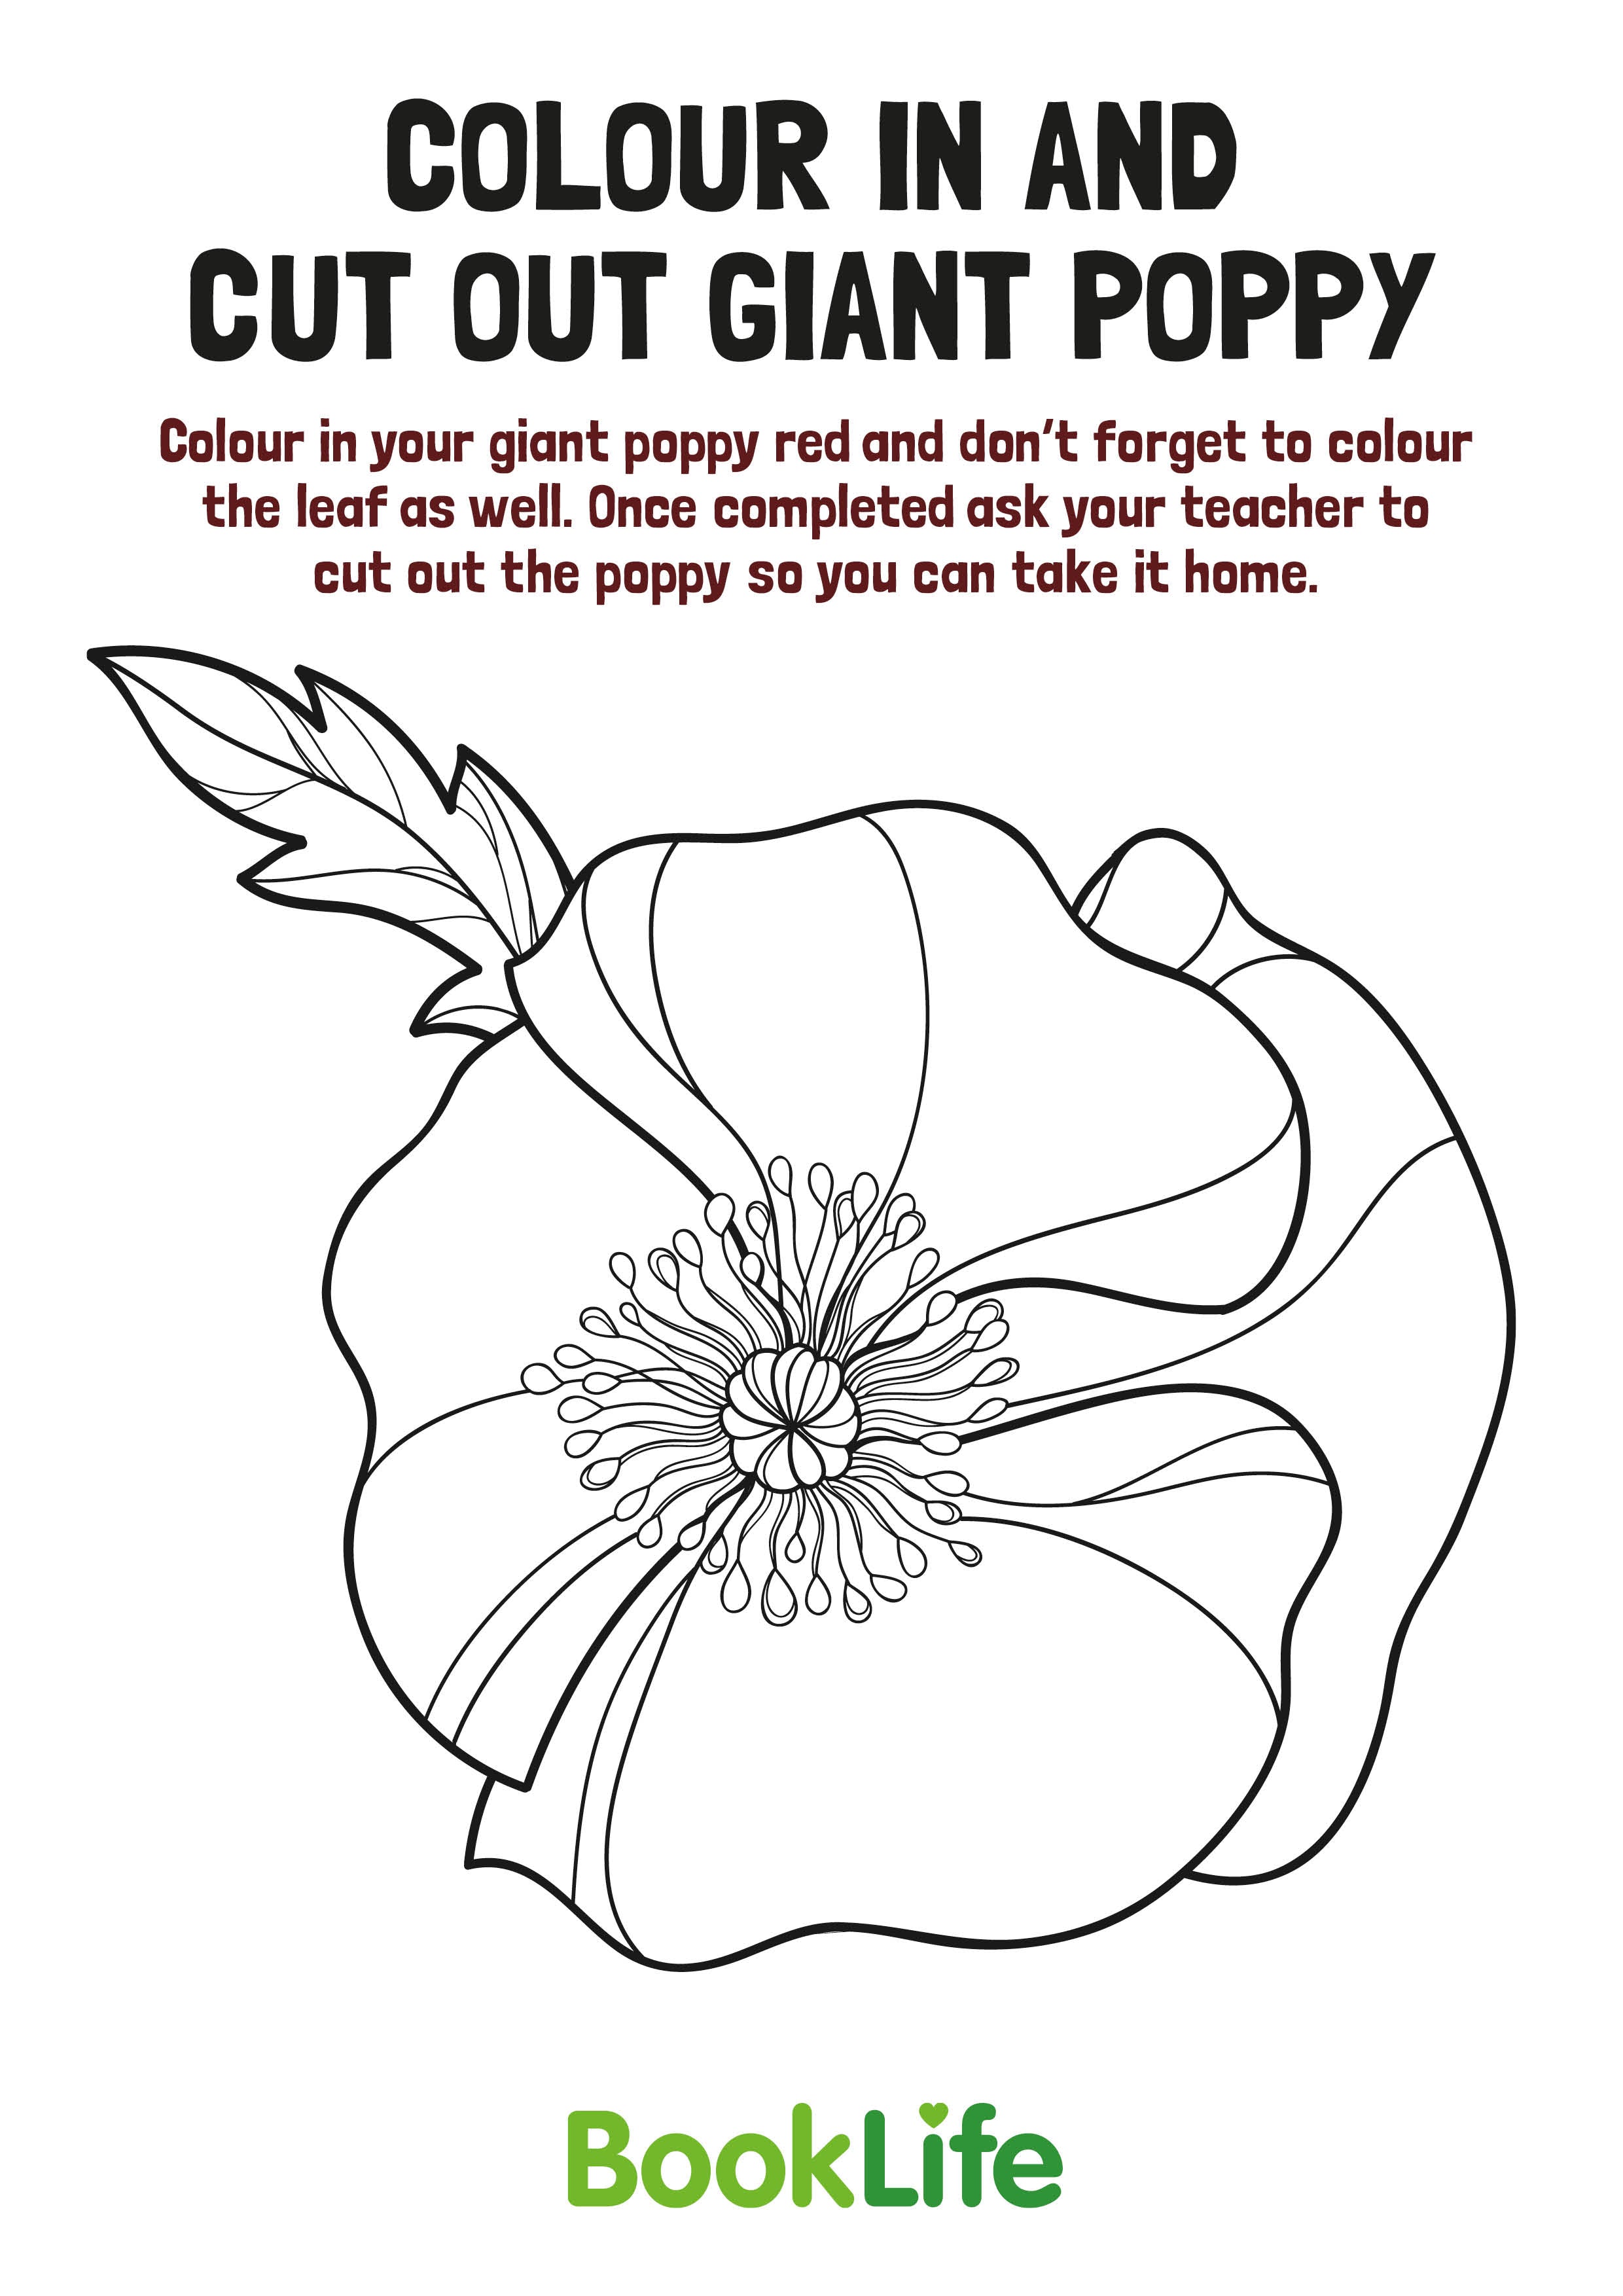 Colour In Poppy Activity Sheet by BookLife